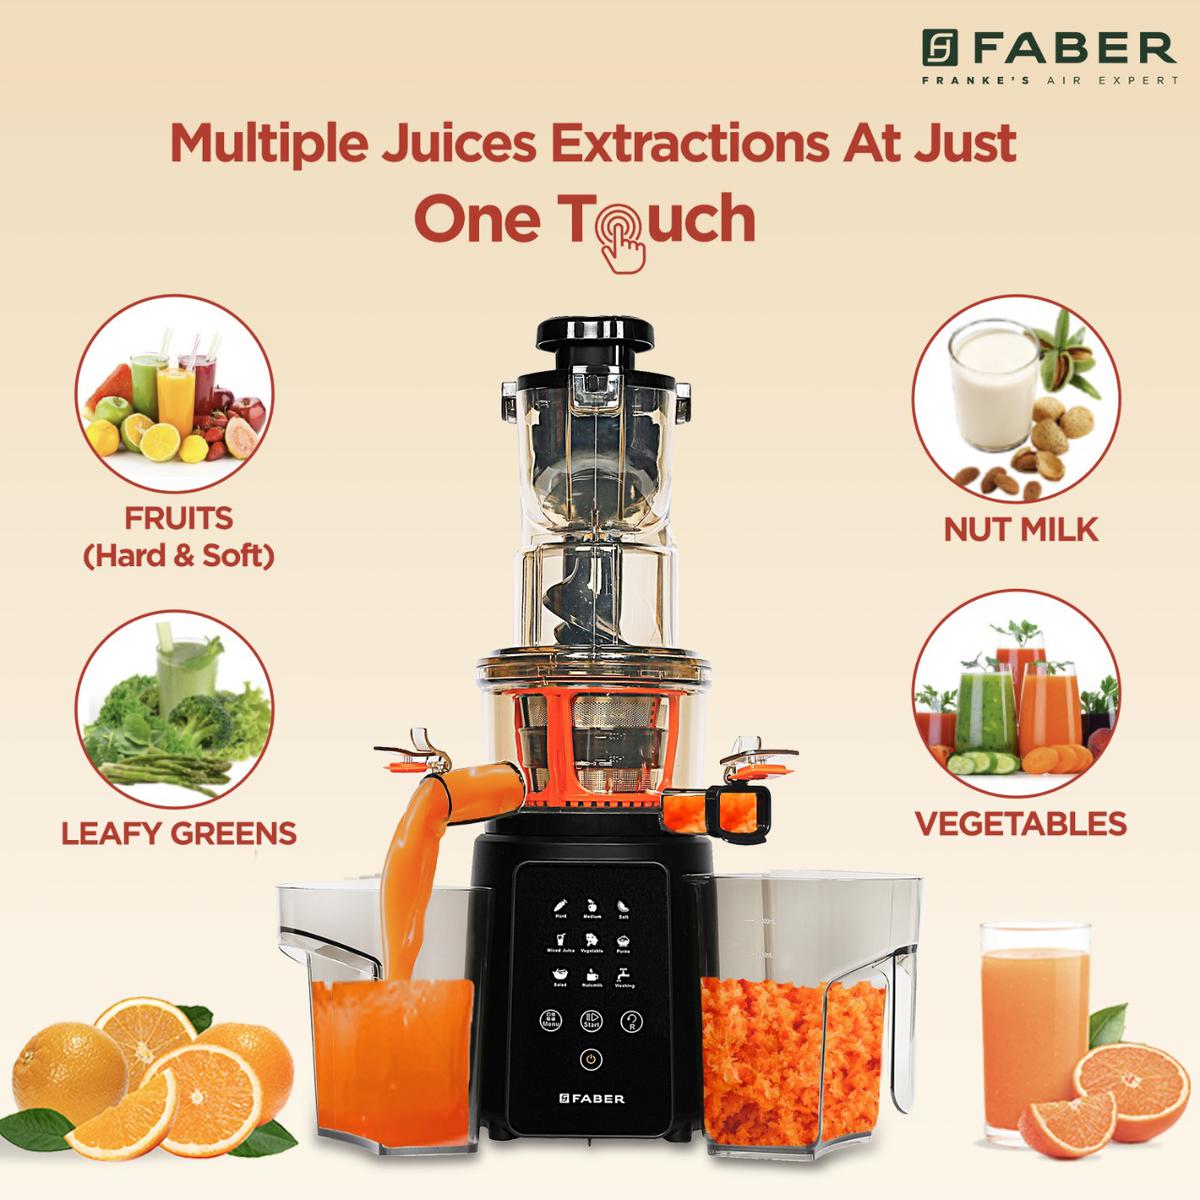 Are you looking to adopt a healthy lifestyle? Here are 5 tips that will help you Or 5 tips for a happier and healthier you with Faber’s slow juicer and salad